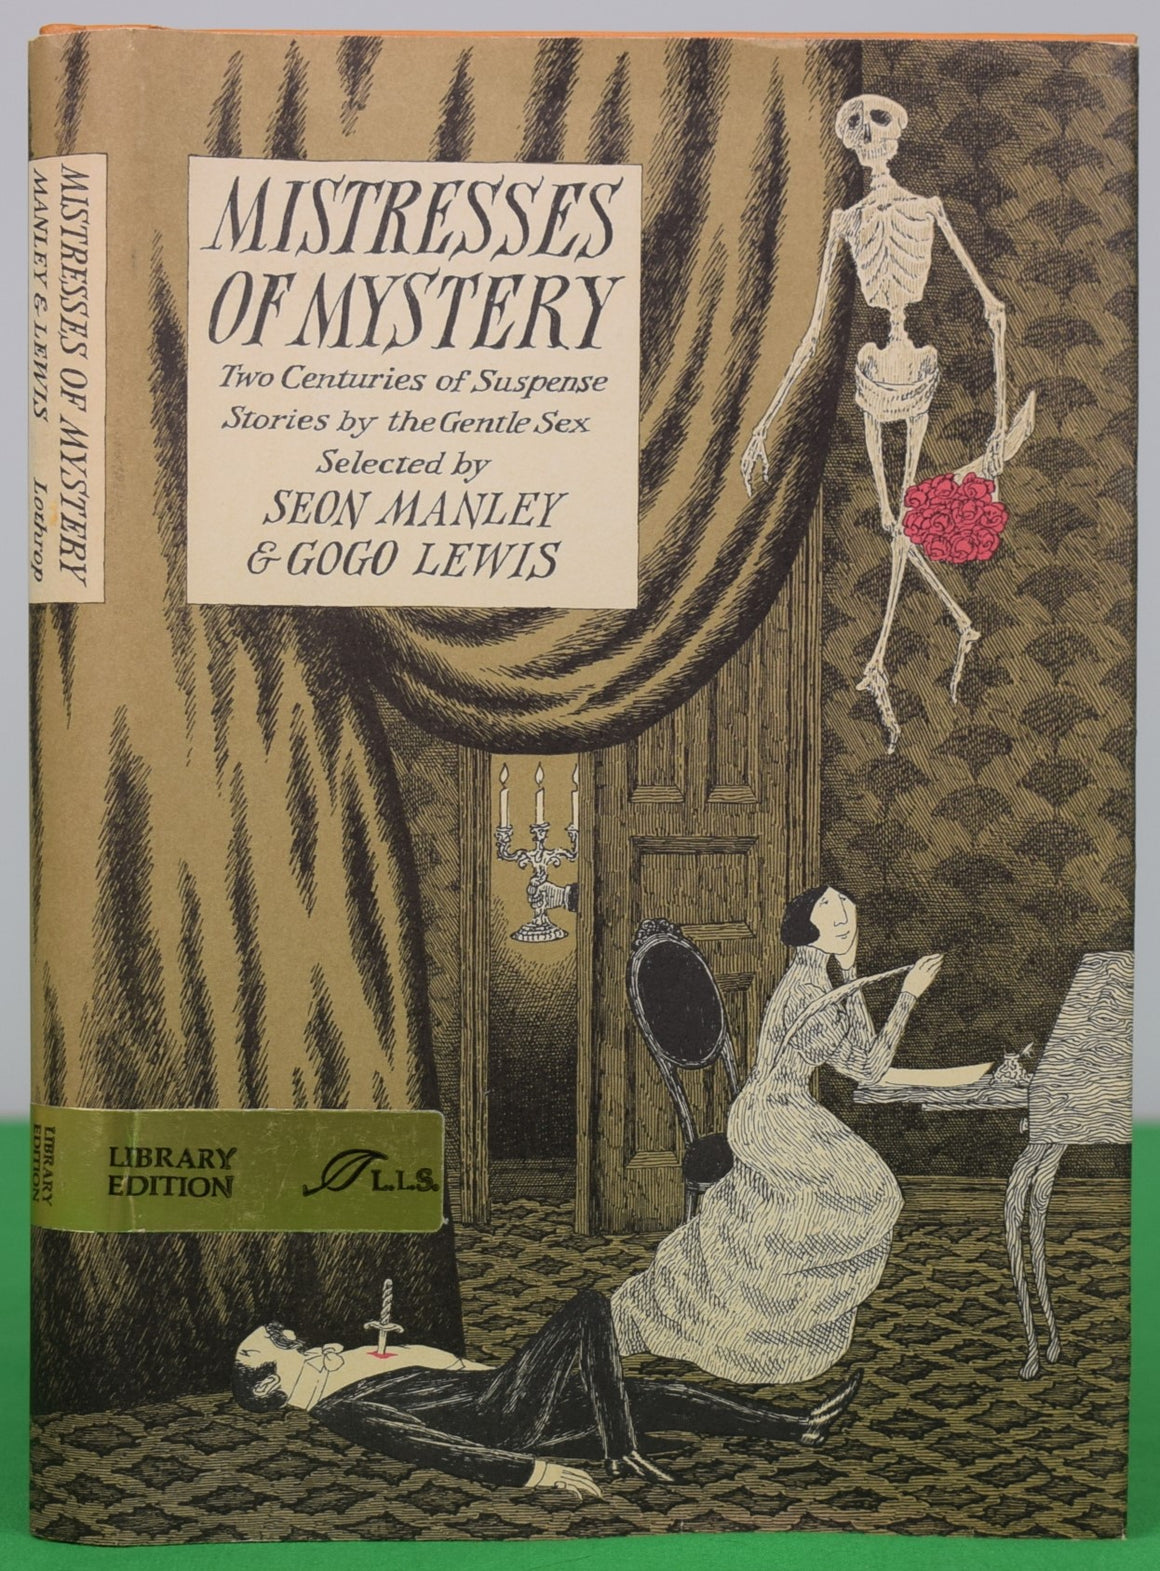 "Mistresses Of Mystery Two Centuries Of Suspense Stories By The Gentle Sex" 1973 MANLEY, Seon & LEWIS, Gogo [selected by]